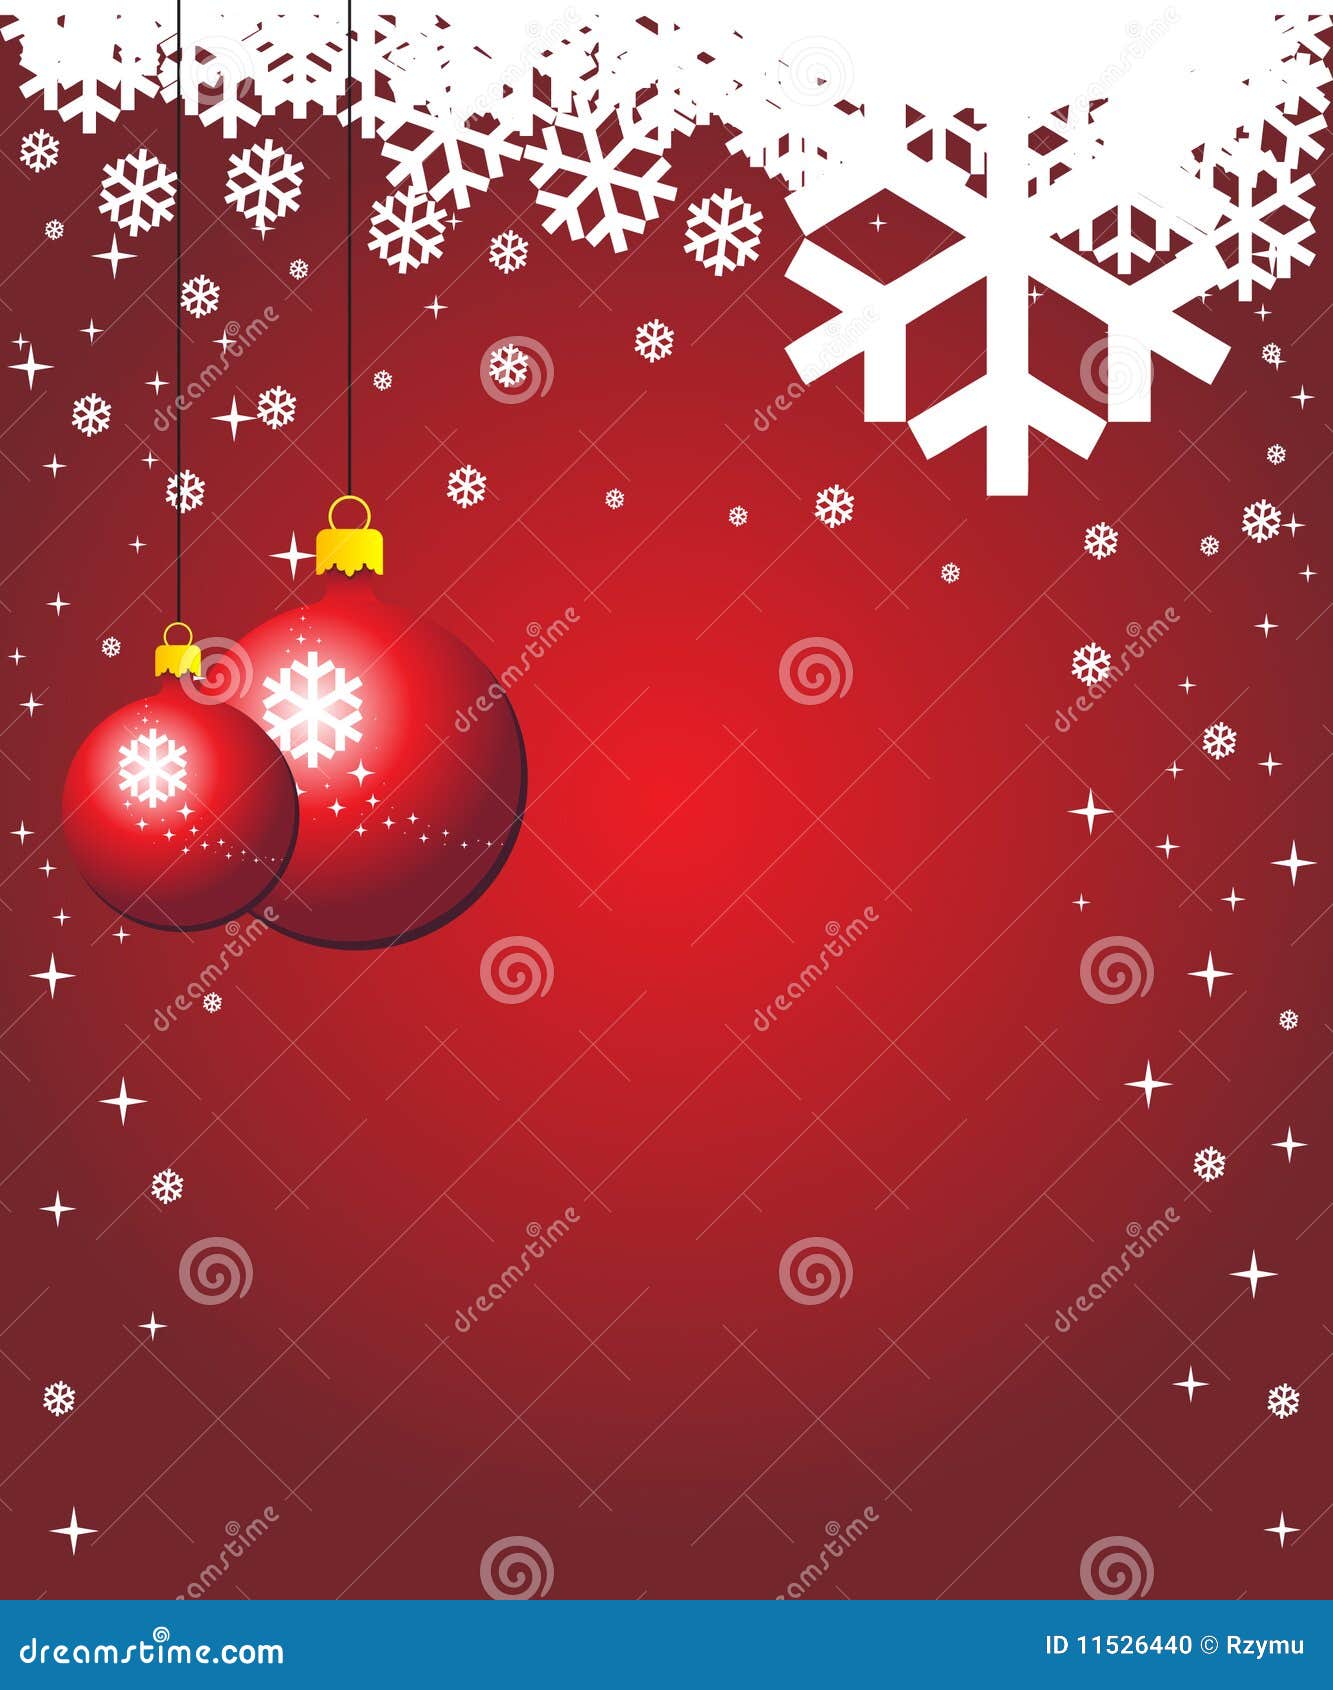 Red winter background stock vector. Illustration of events - 11526440